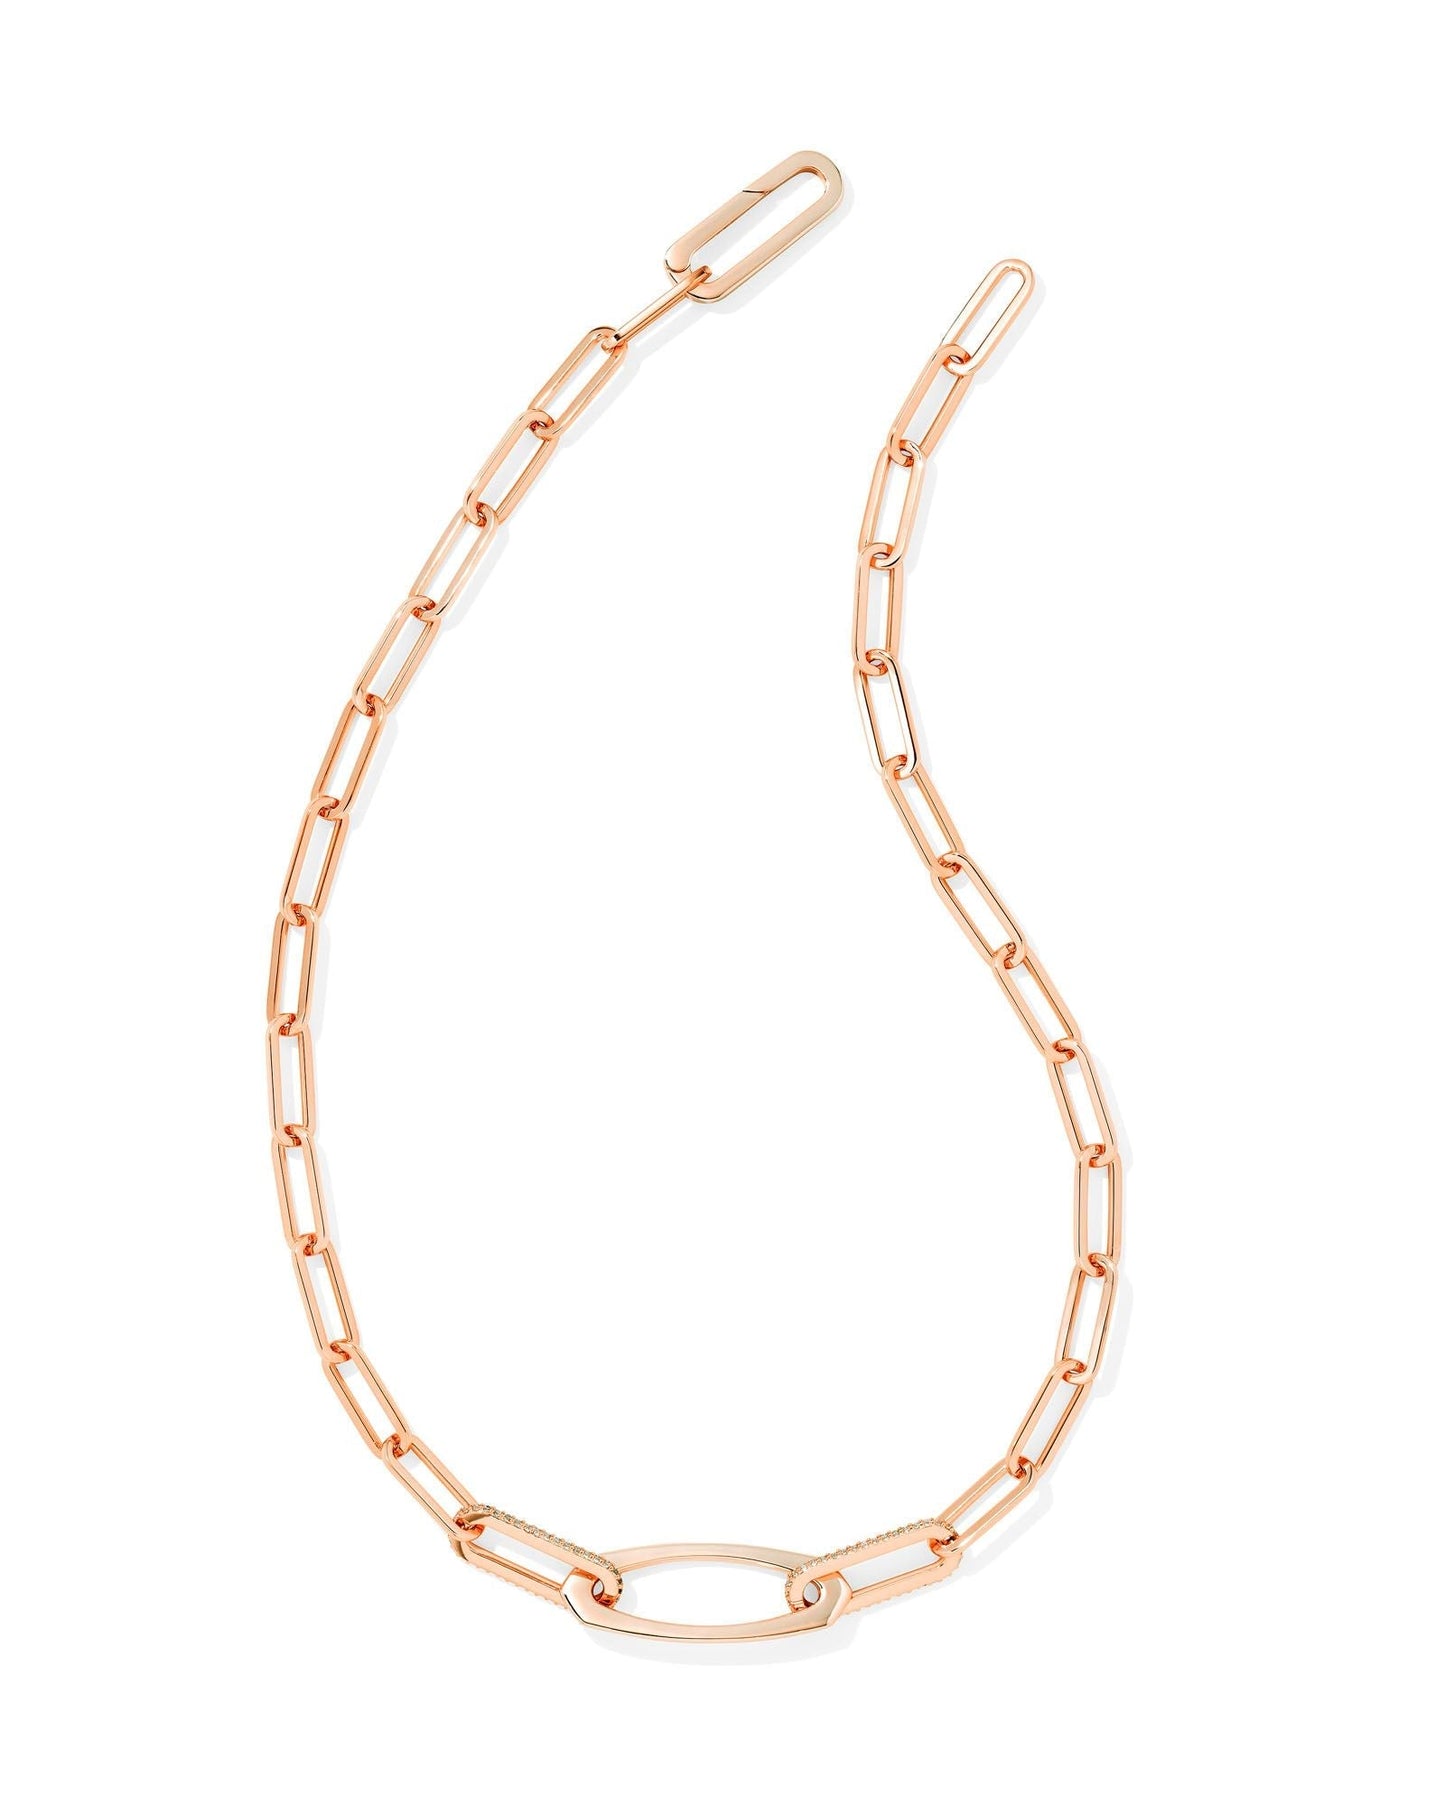 ADELINE CHAIN NECKLACE ROSE GOLD METAL